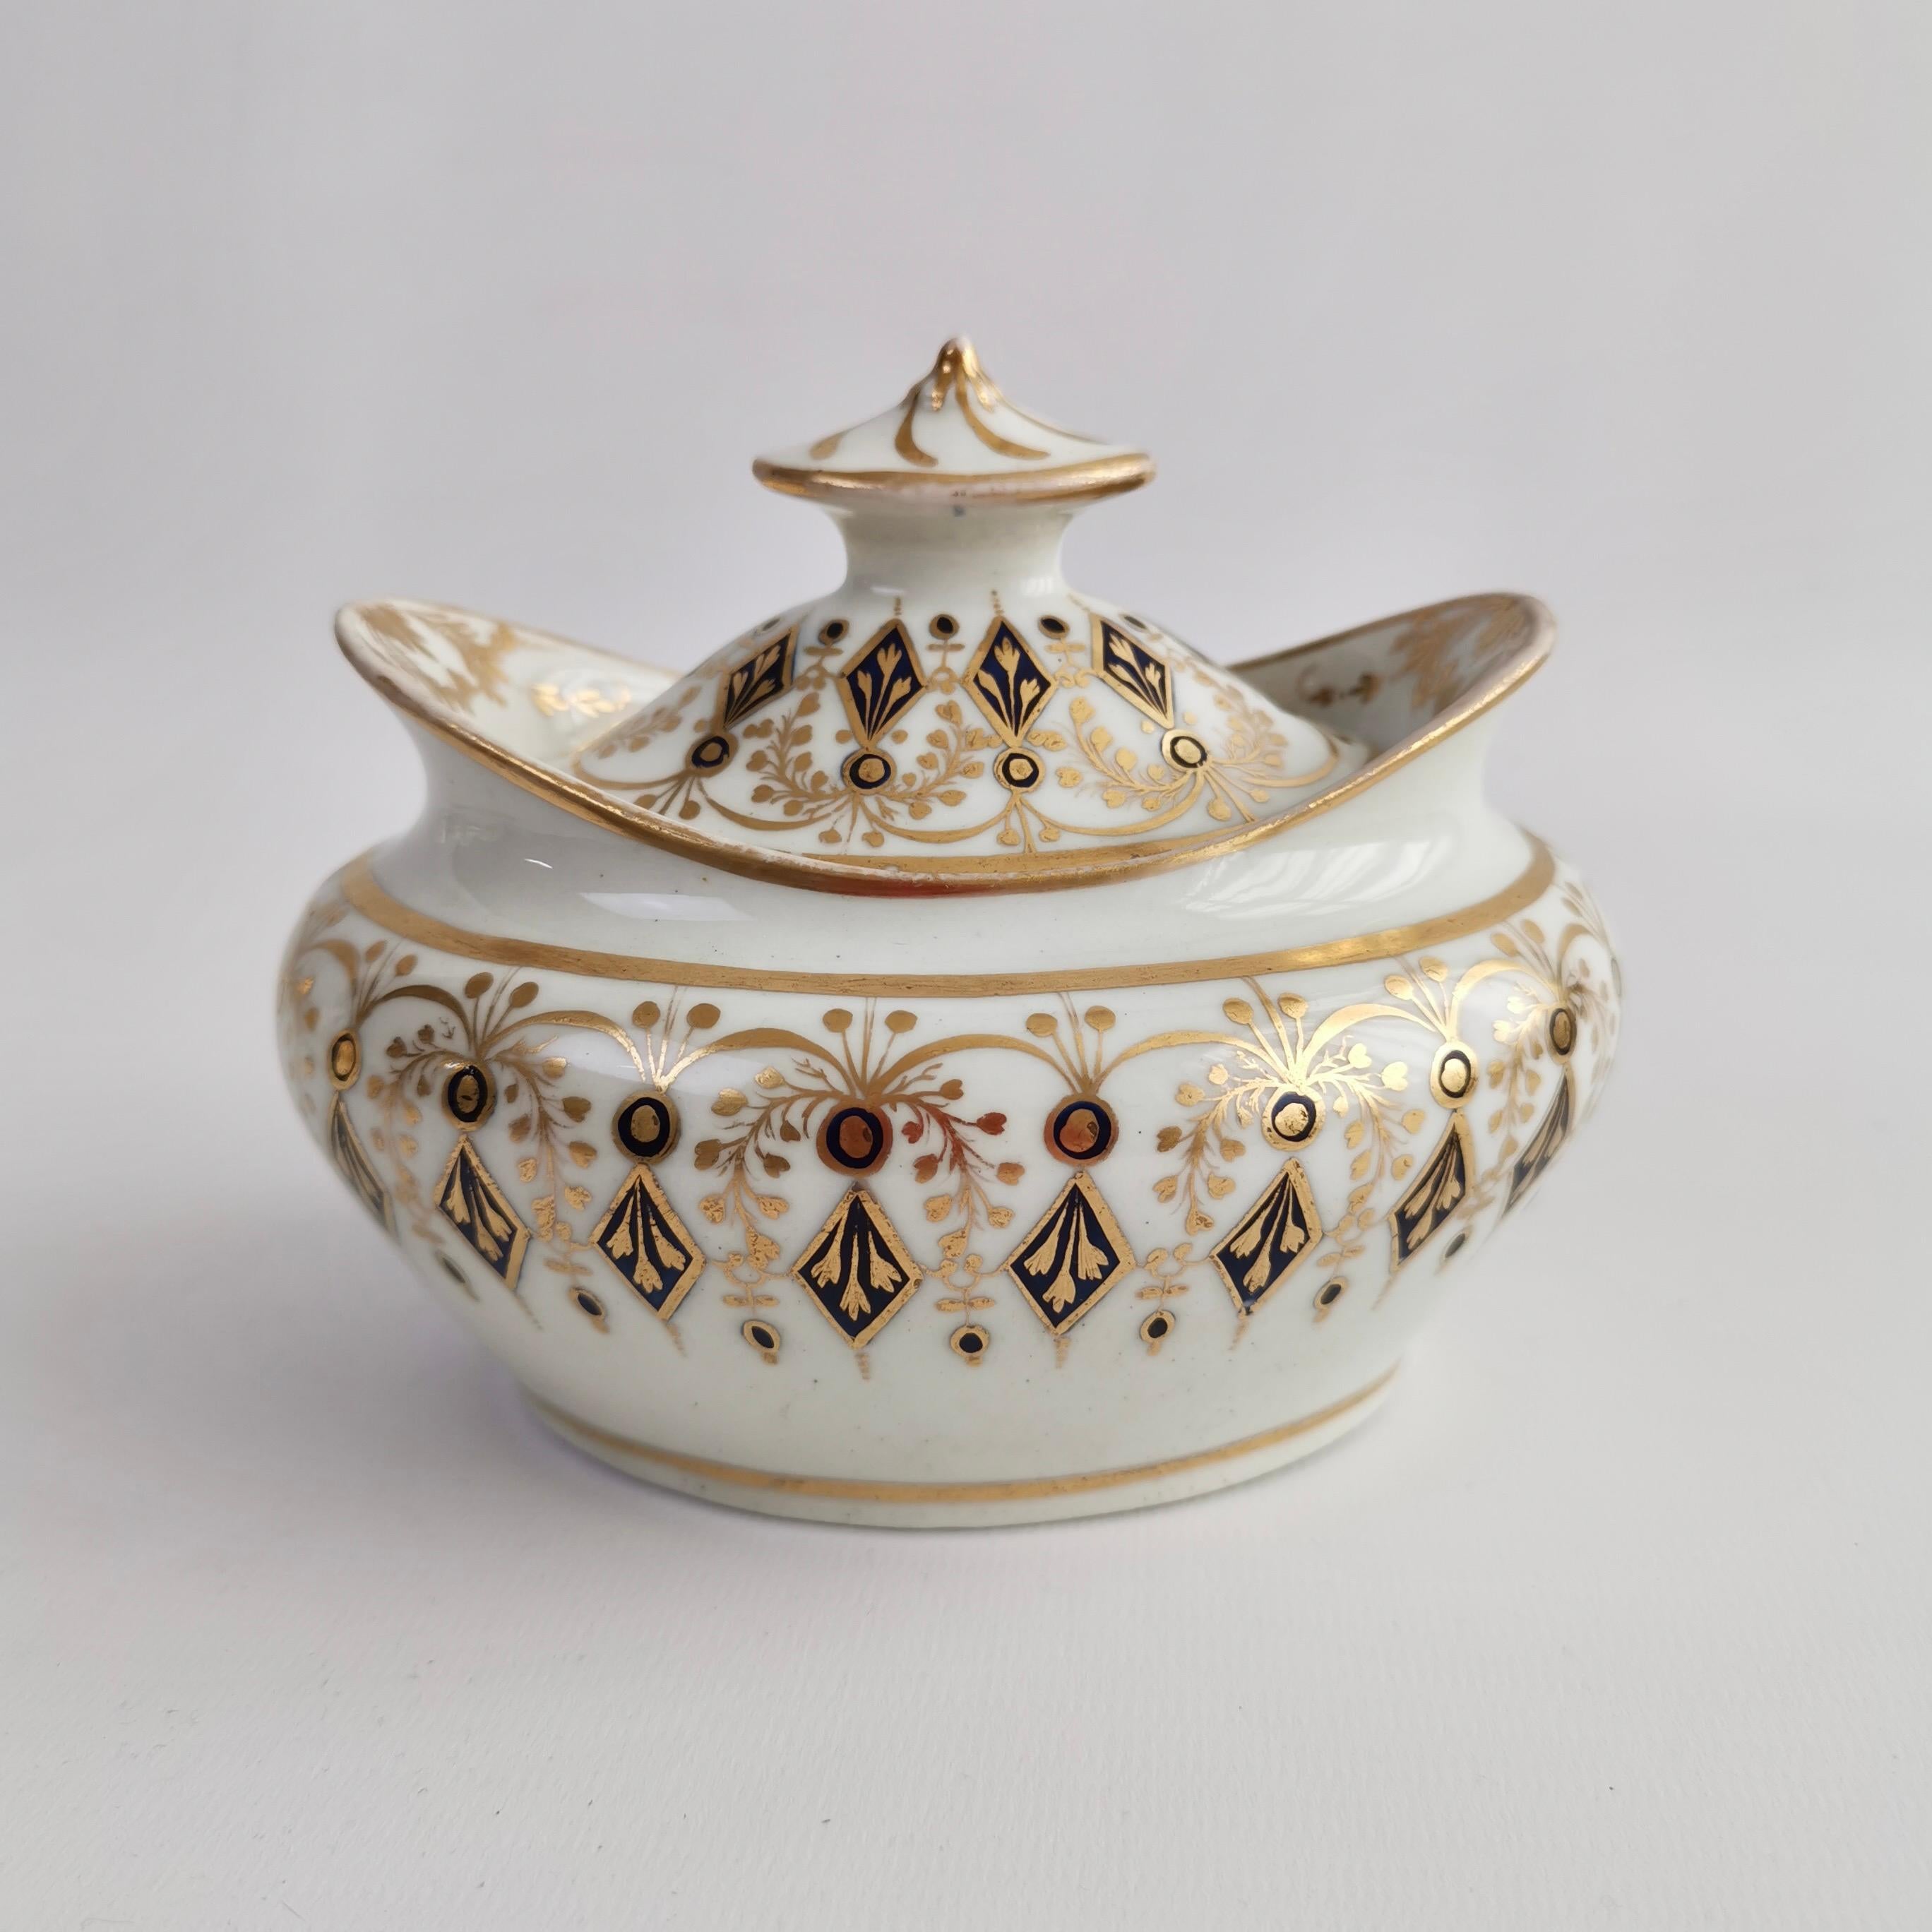 New Hall Porcelain Tea Service, Neoclassical Cobalt Blue and Gilt, ca 1810 In Good Condition For Sale In London, GB